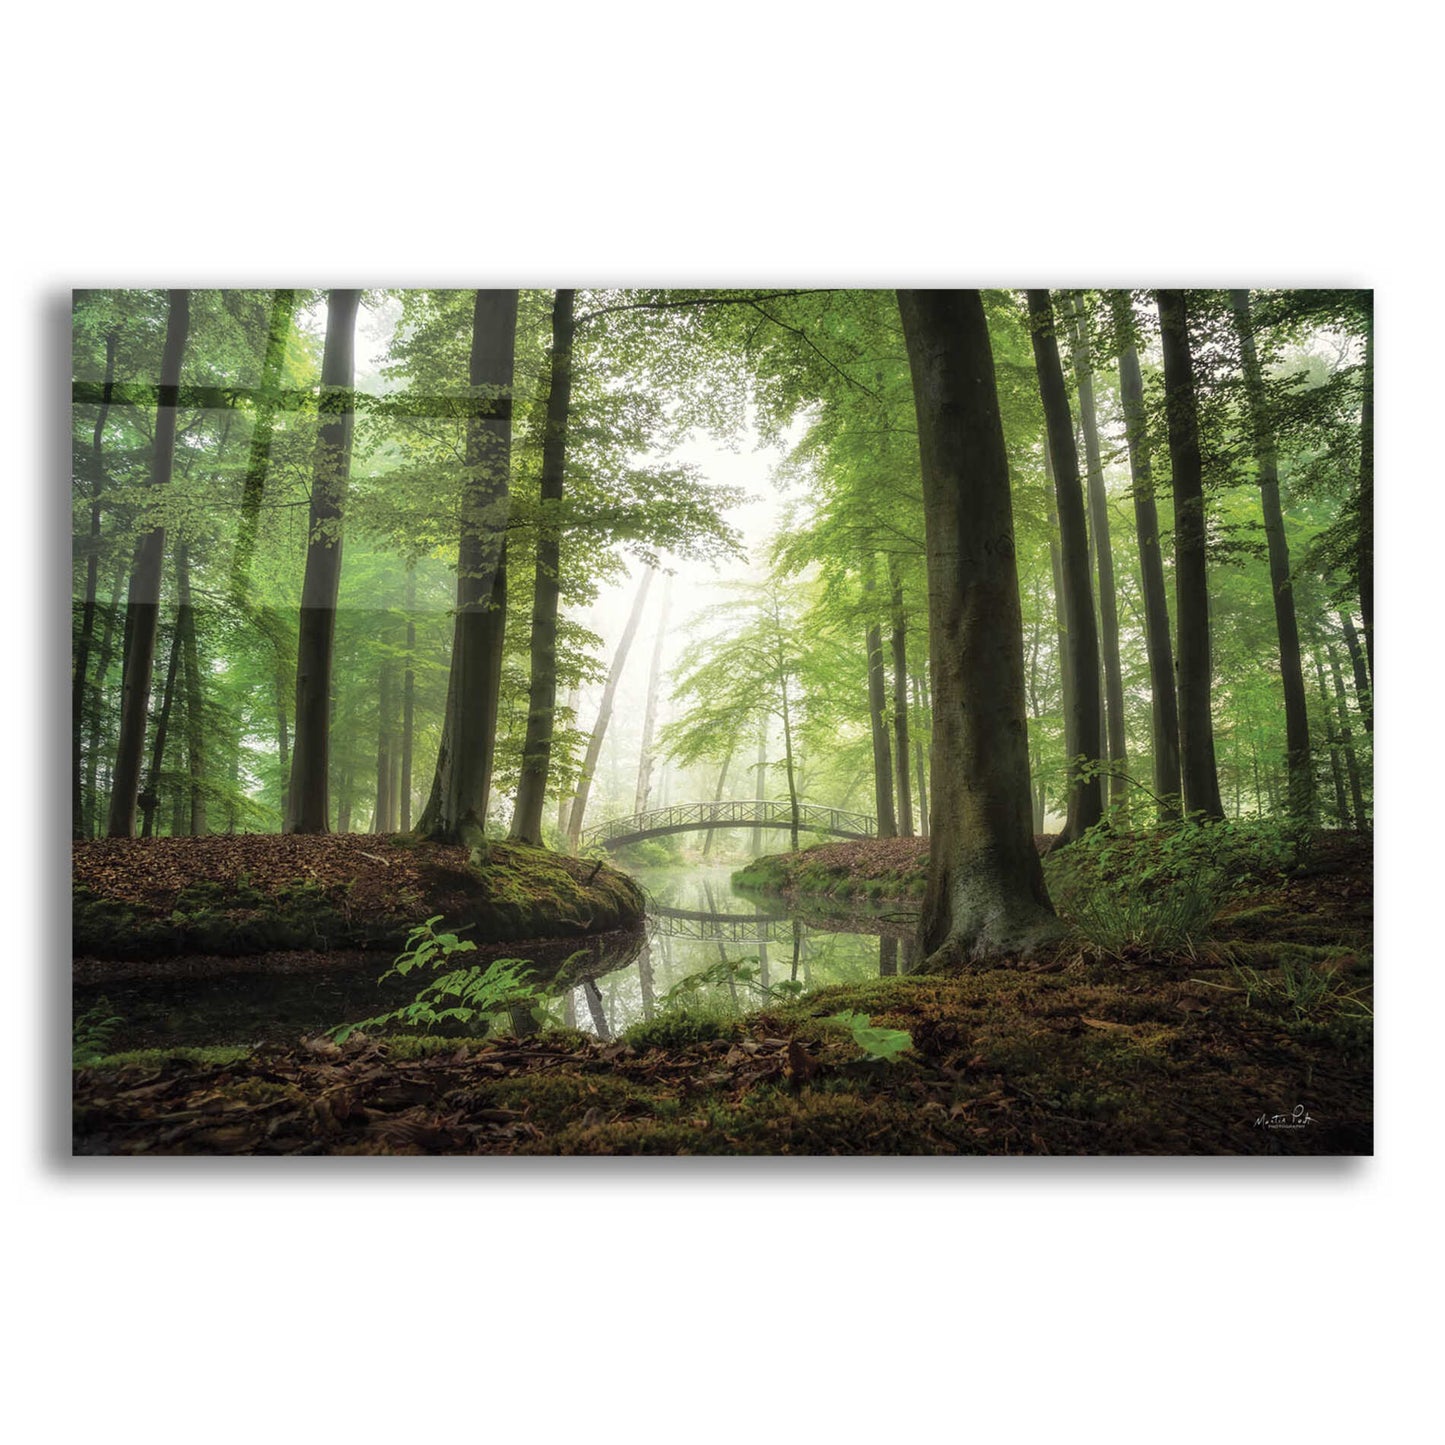 Epic Art 'On a Beautiful Morning' by Martin Podt, Acrylic Glass Wall Art,16x12